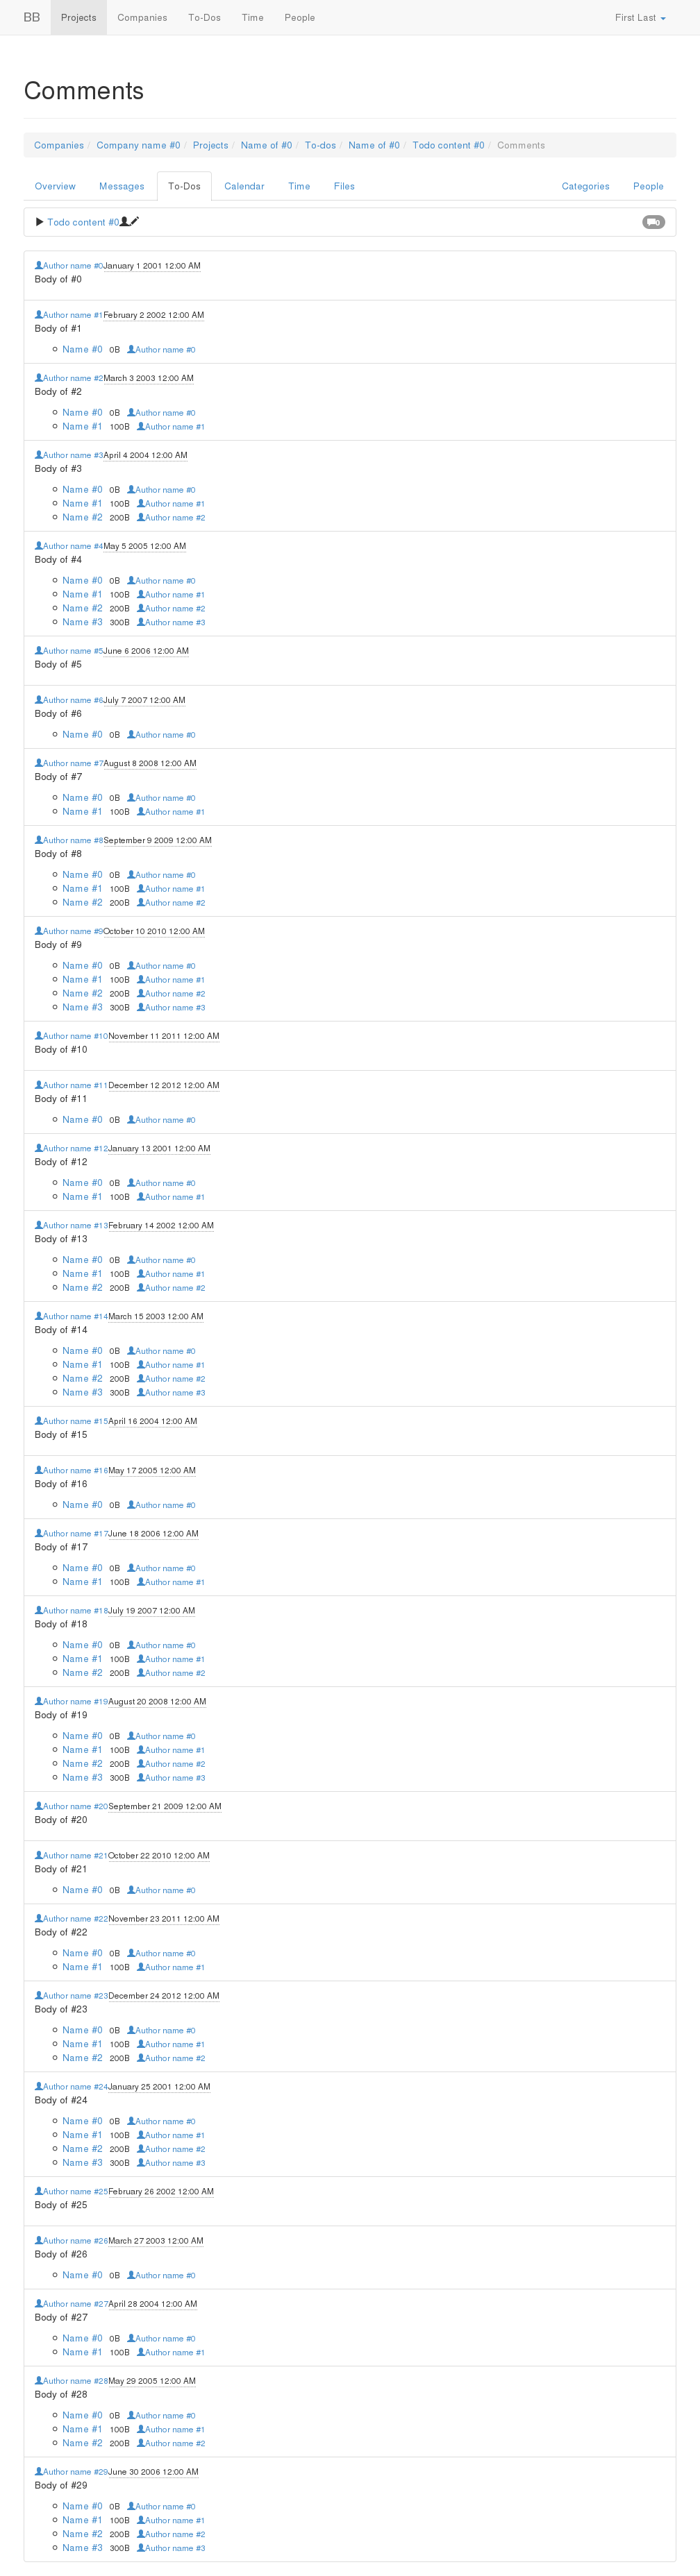 _images/project_todo_comments.png